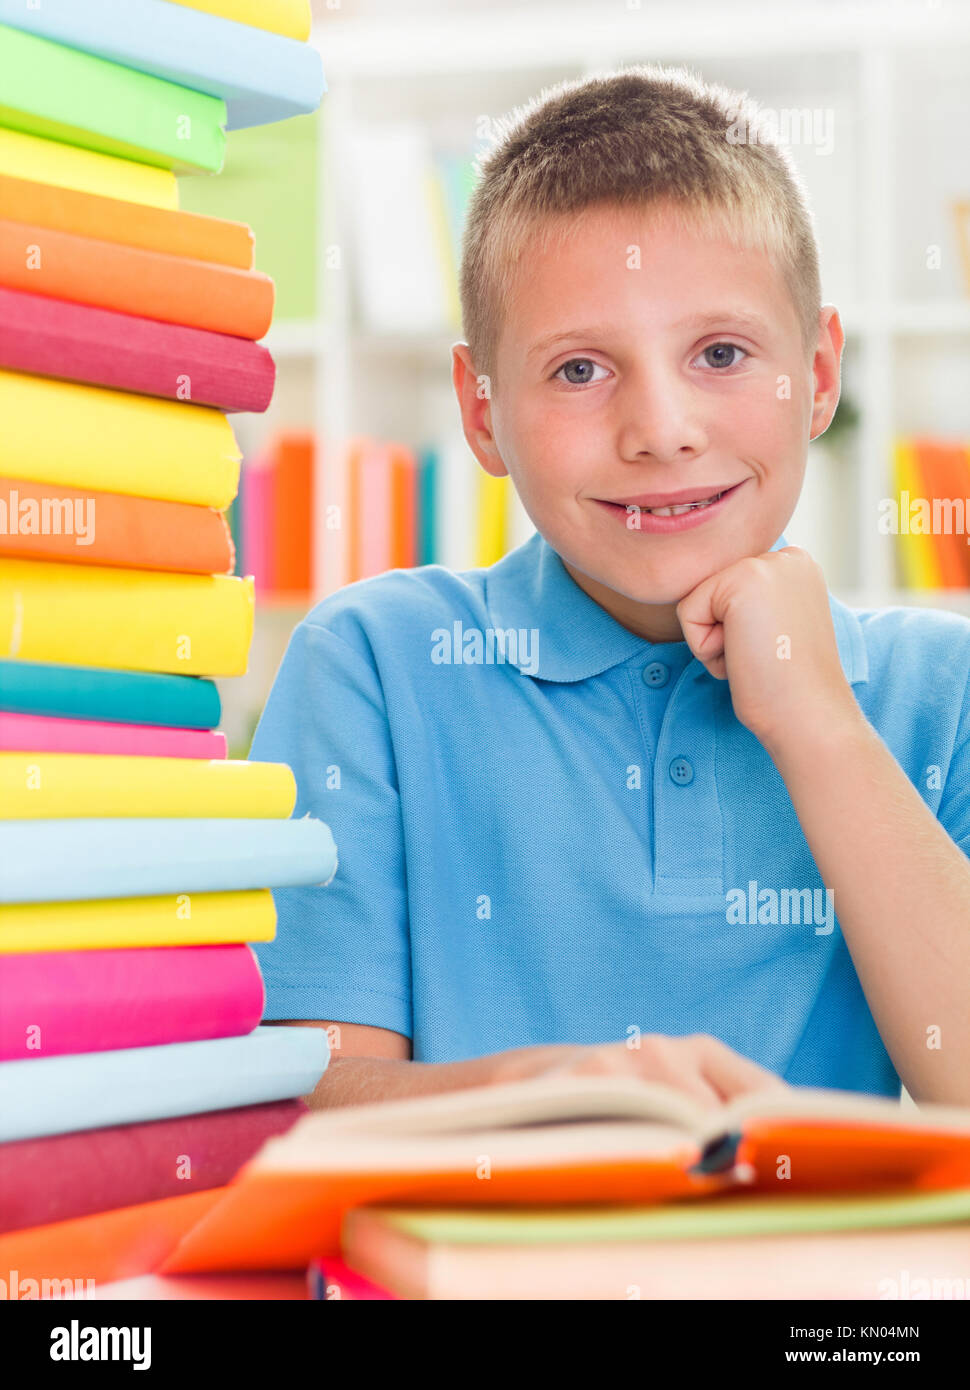 Happy smiling boy studying in order to get good marks Stock Photo